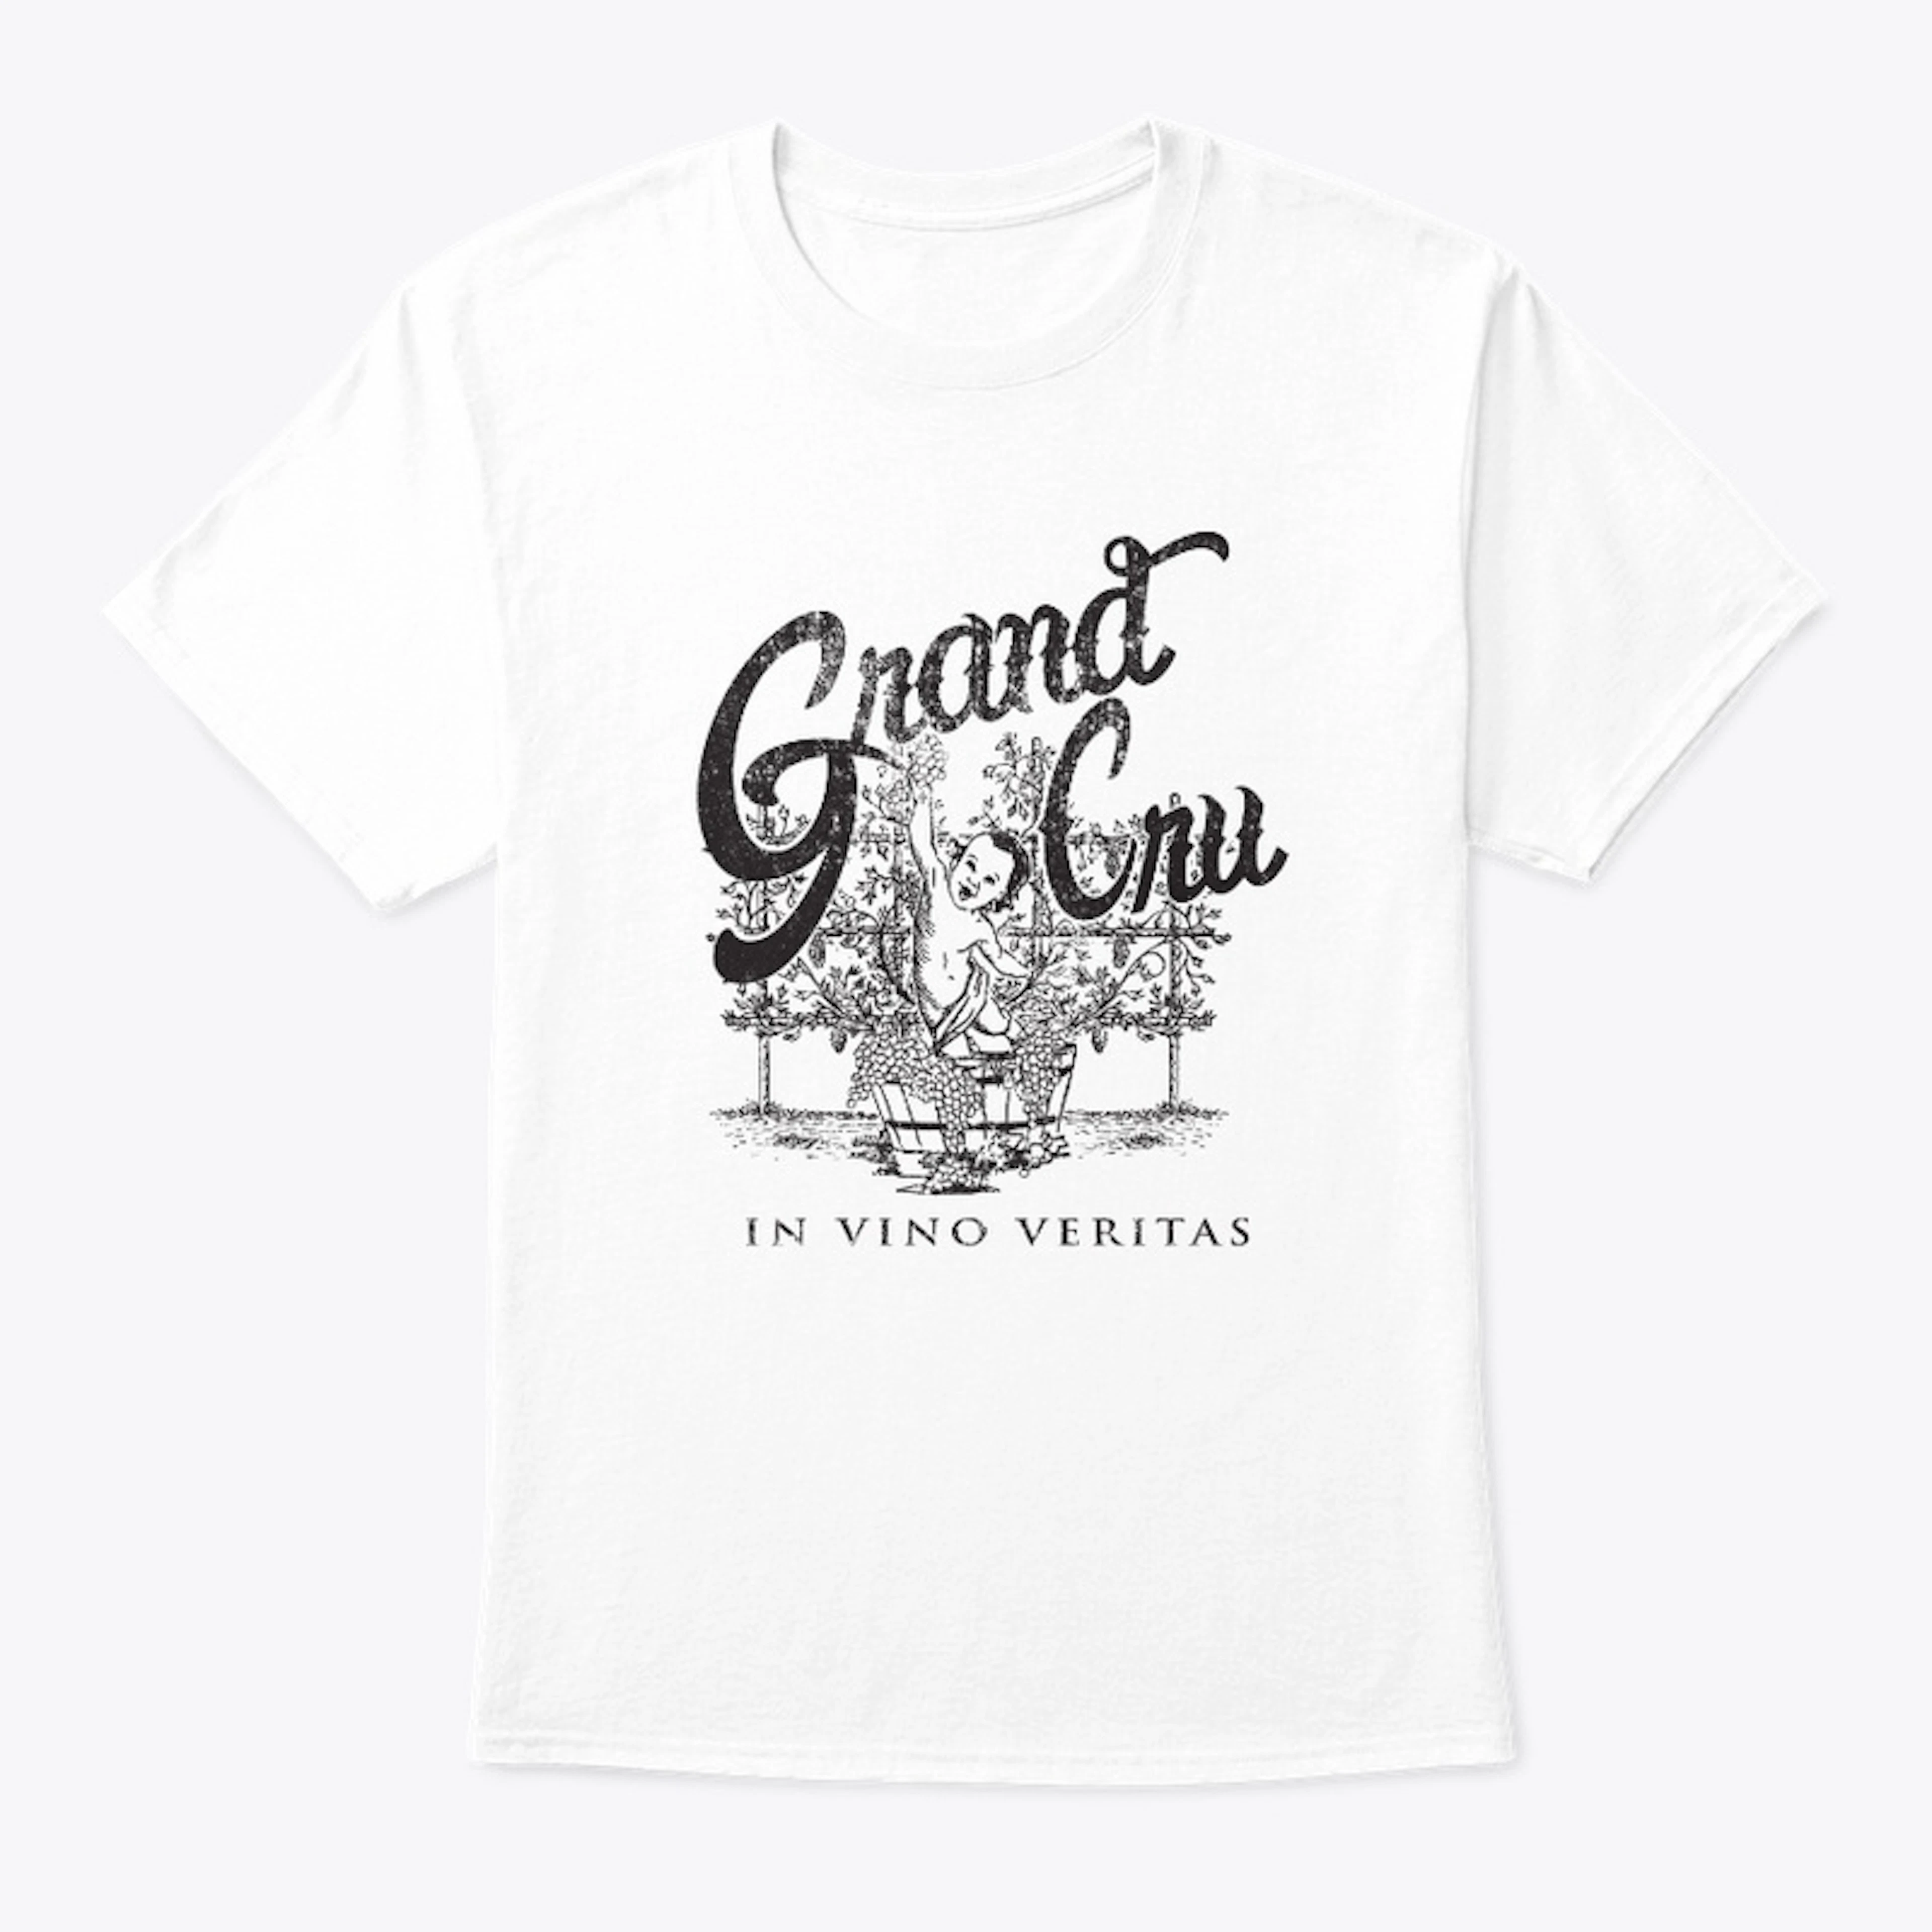 Grand Cru T-shirt For Wine Lovers